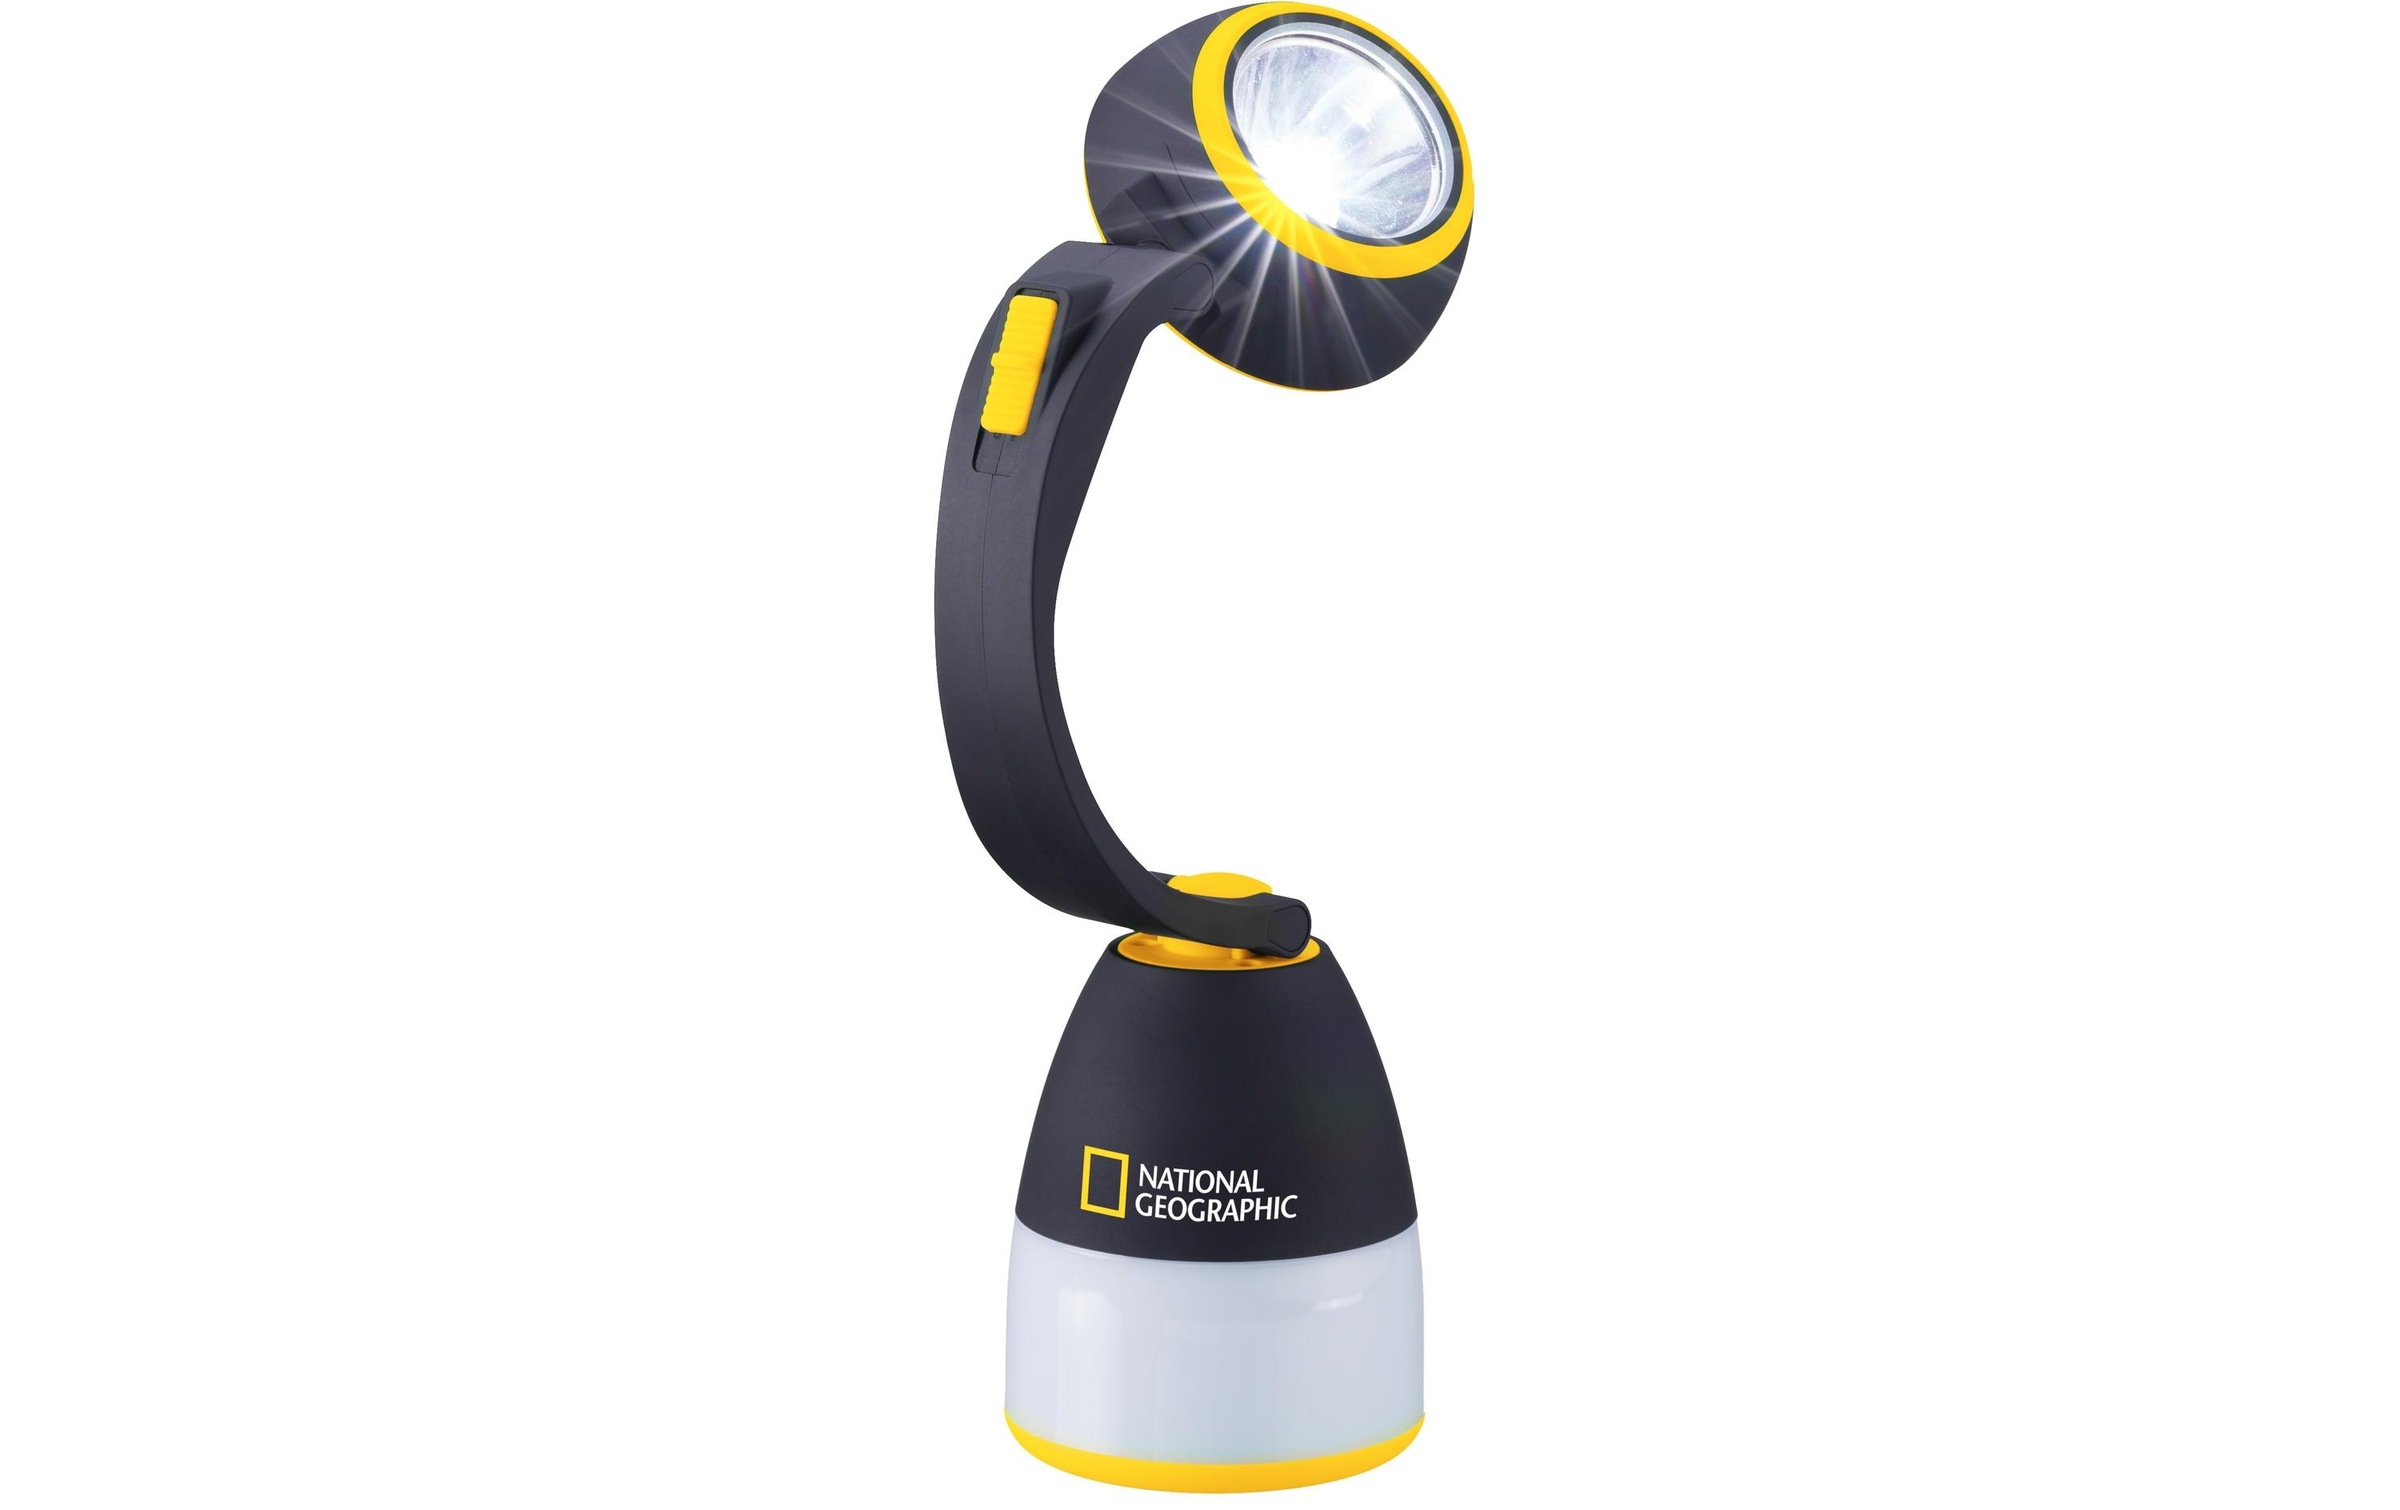 NATIONAL GEOGRAPHIC LED Laterne »Outdoor 3in1 Outdoor-Laterne«, 1 flammig-flammig